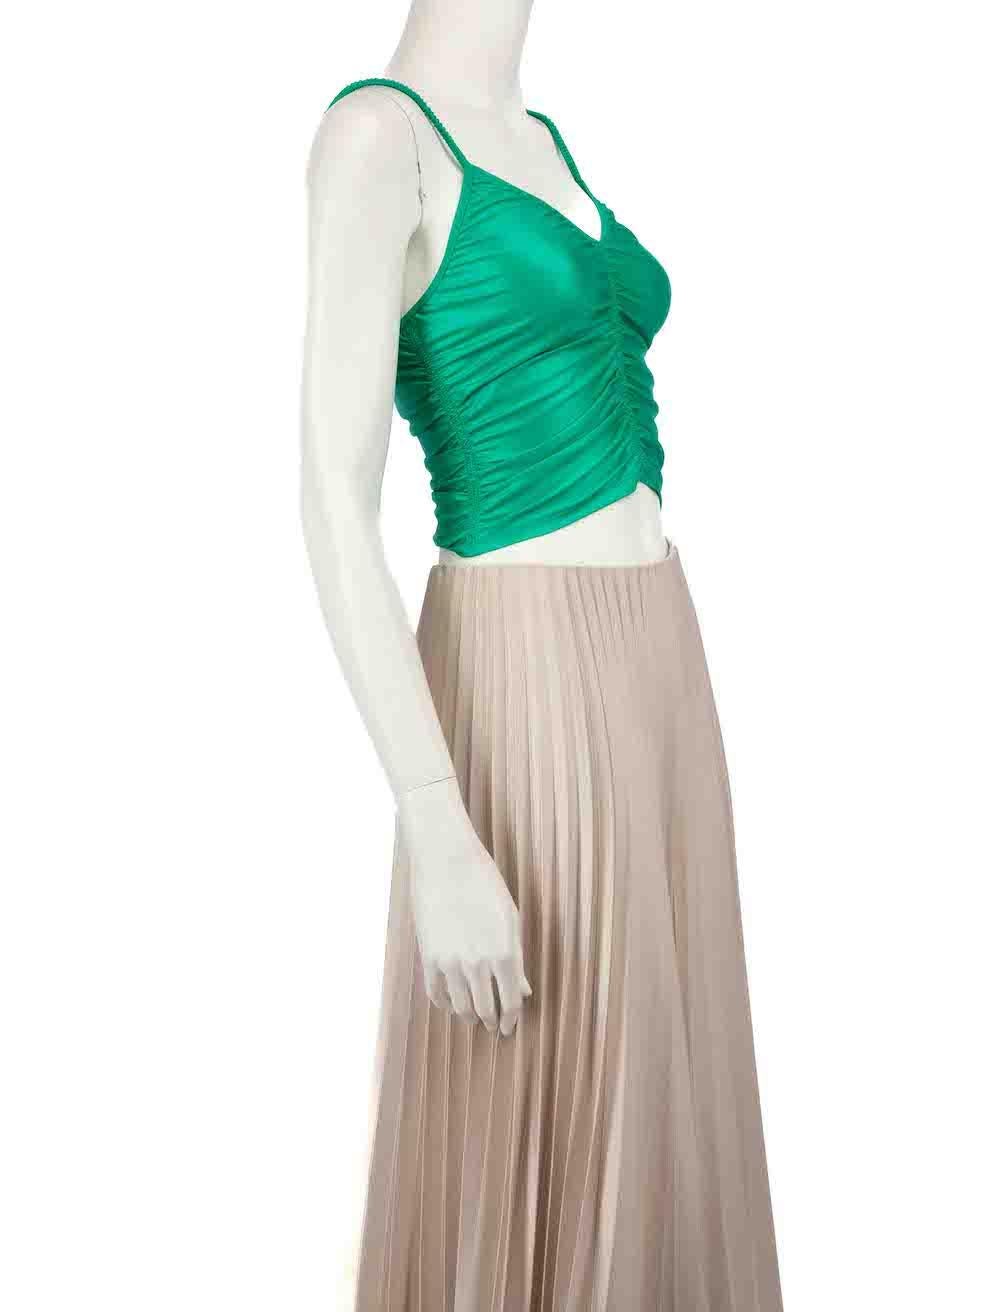 CONDITION is Very good. Minimal wear to top is evident. Minimal wear with the composition and size labels having been removed on this used Alexander Wang designer resale item.
 
 
 
 Details
 
 
 Green
 
 Synthetic
 
 Top
 
 Sleeveless
 
 Cropped